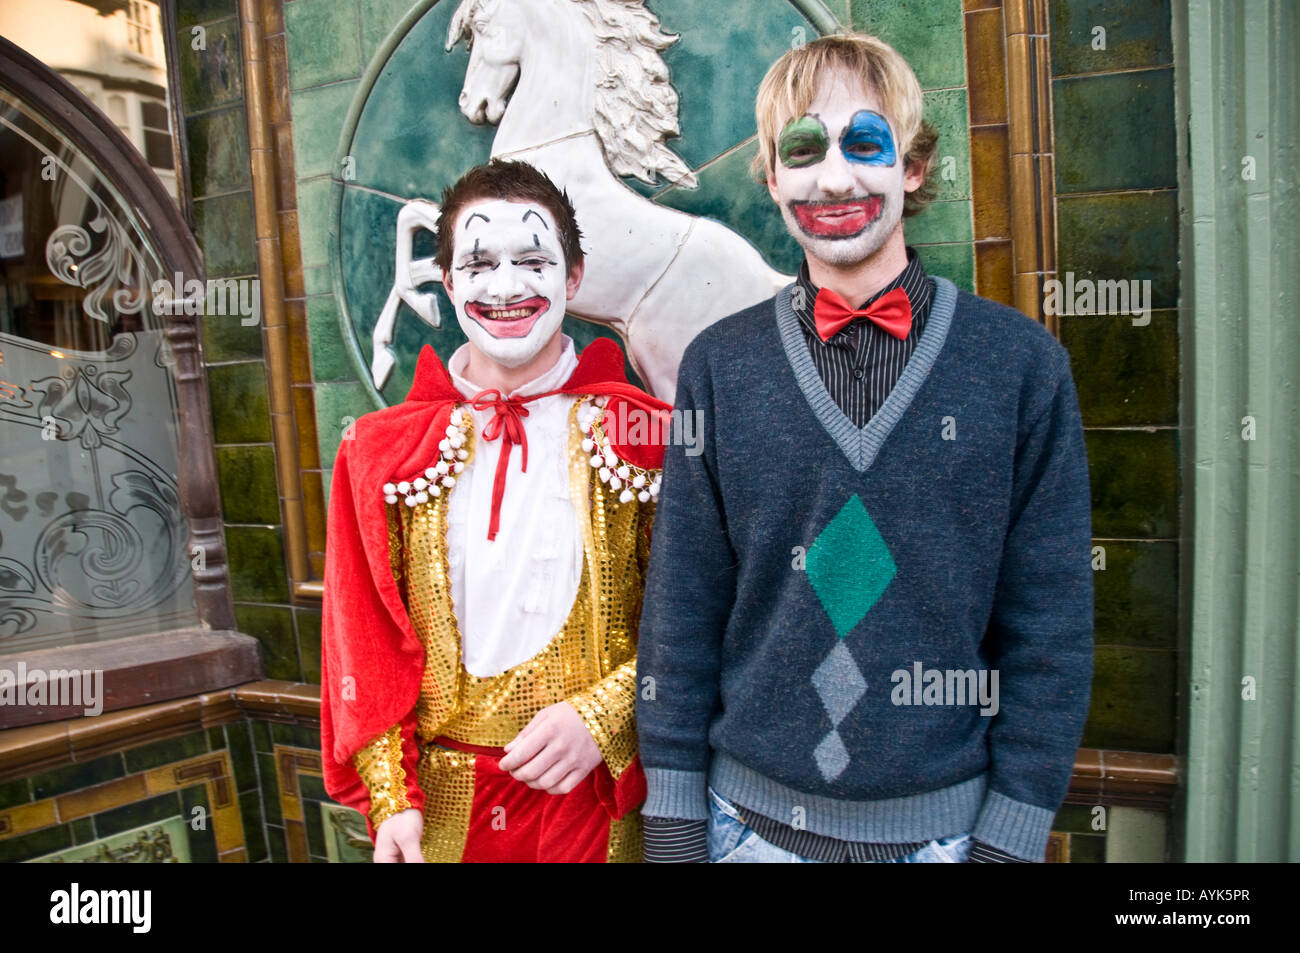 Two men with faces painted as clowns standing outside a pub in Aberystwyth Wales Stock Photo